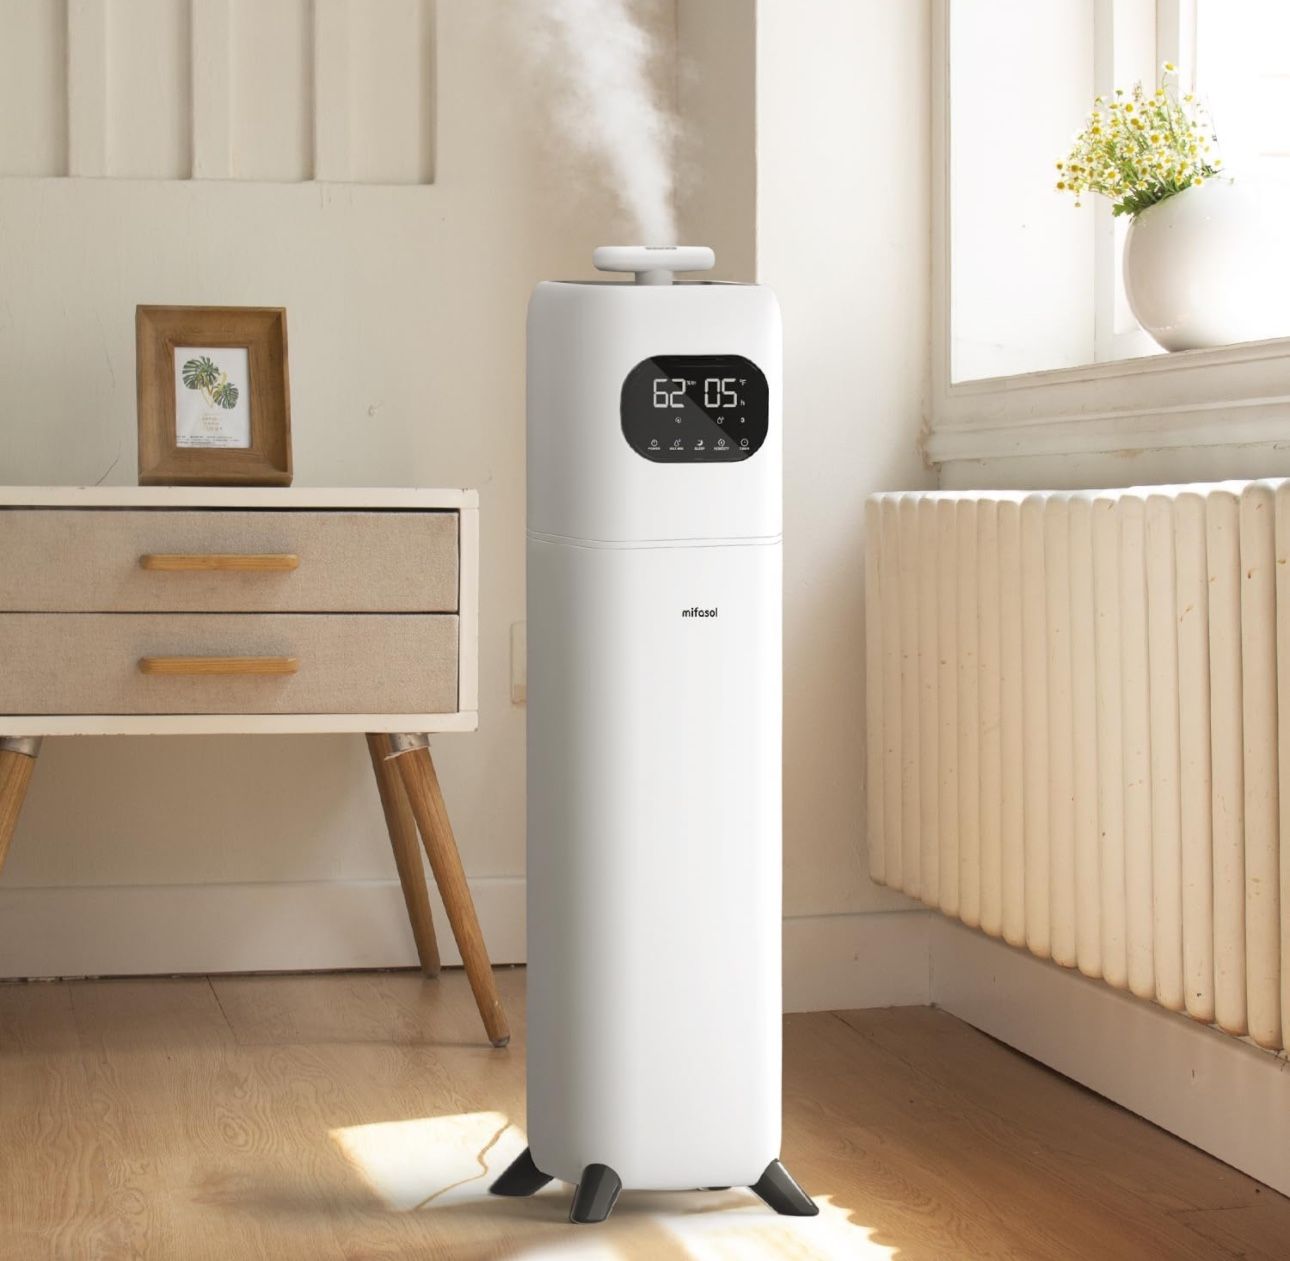 Humidifiers for Large Room Home, 2.3Gal/9L Quiet Humidifiers for Bedroom with Timer, 360°Nozzle, Aroma Box, 3 Speed Ultrasonic Cool Mist Humidifier wi